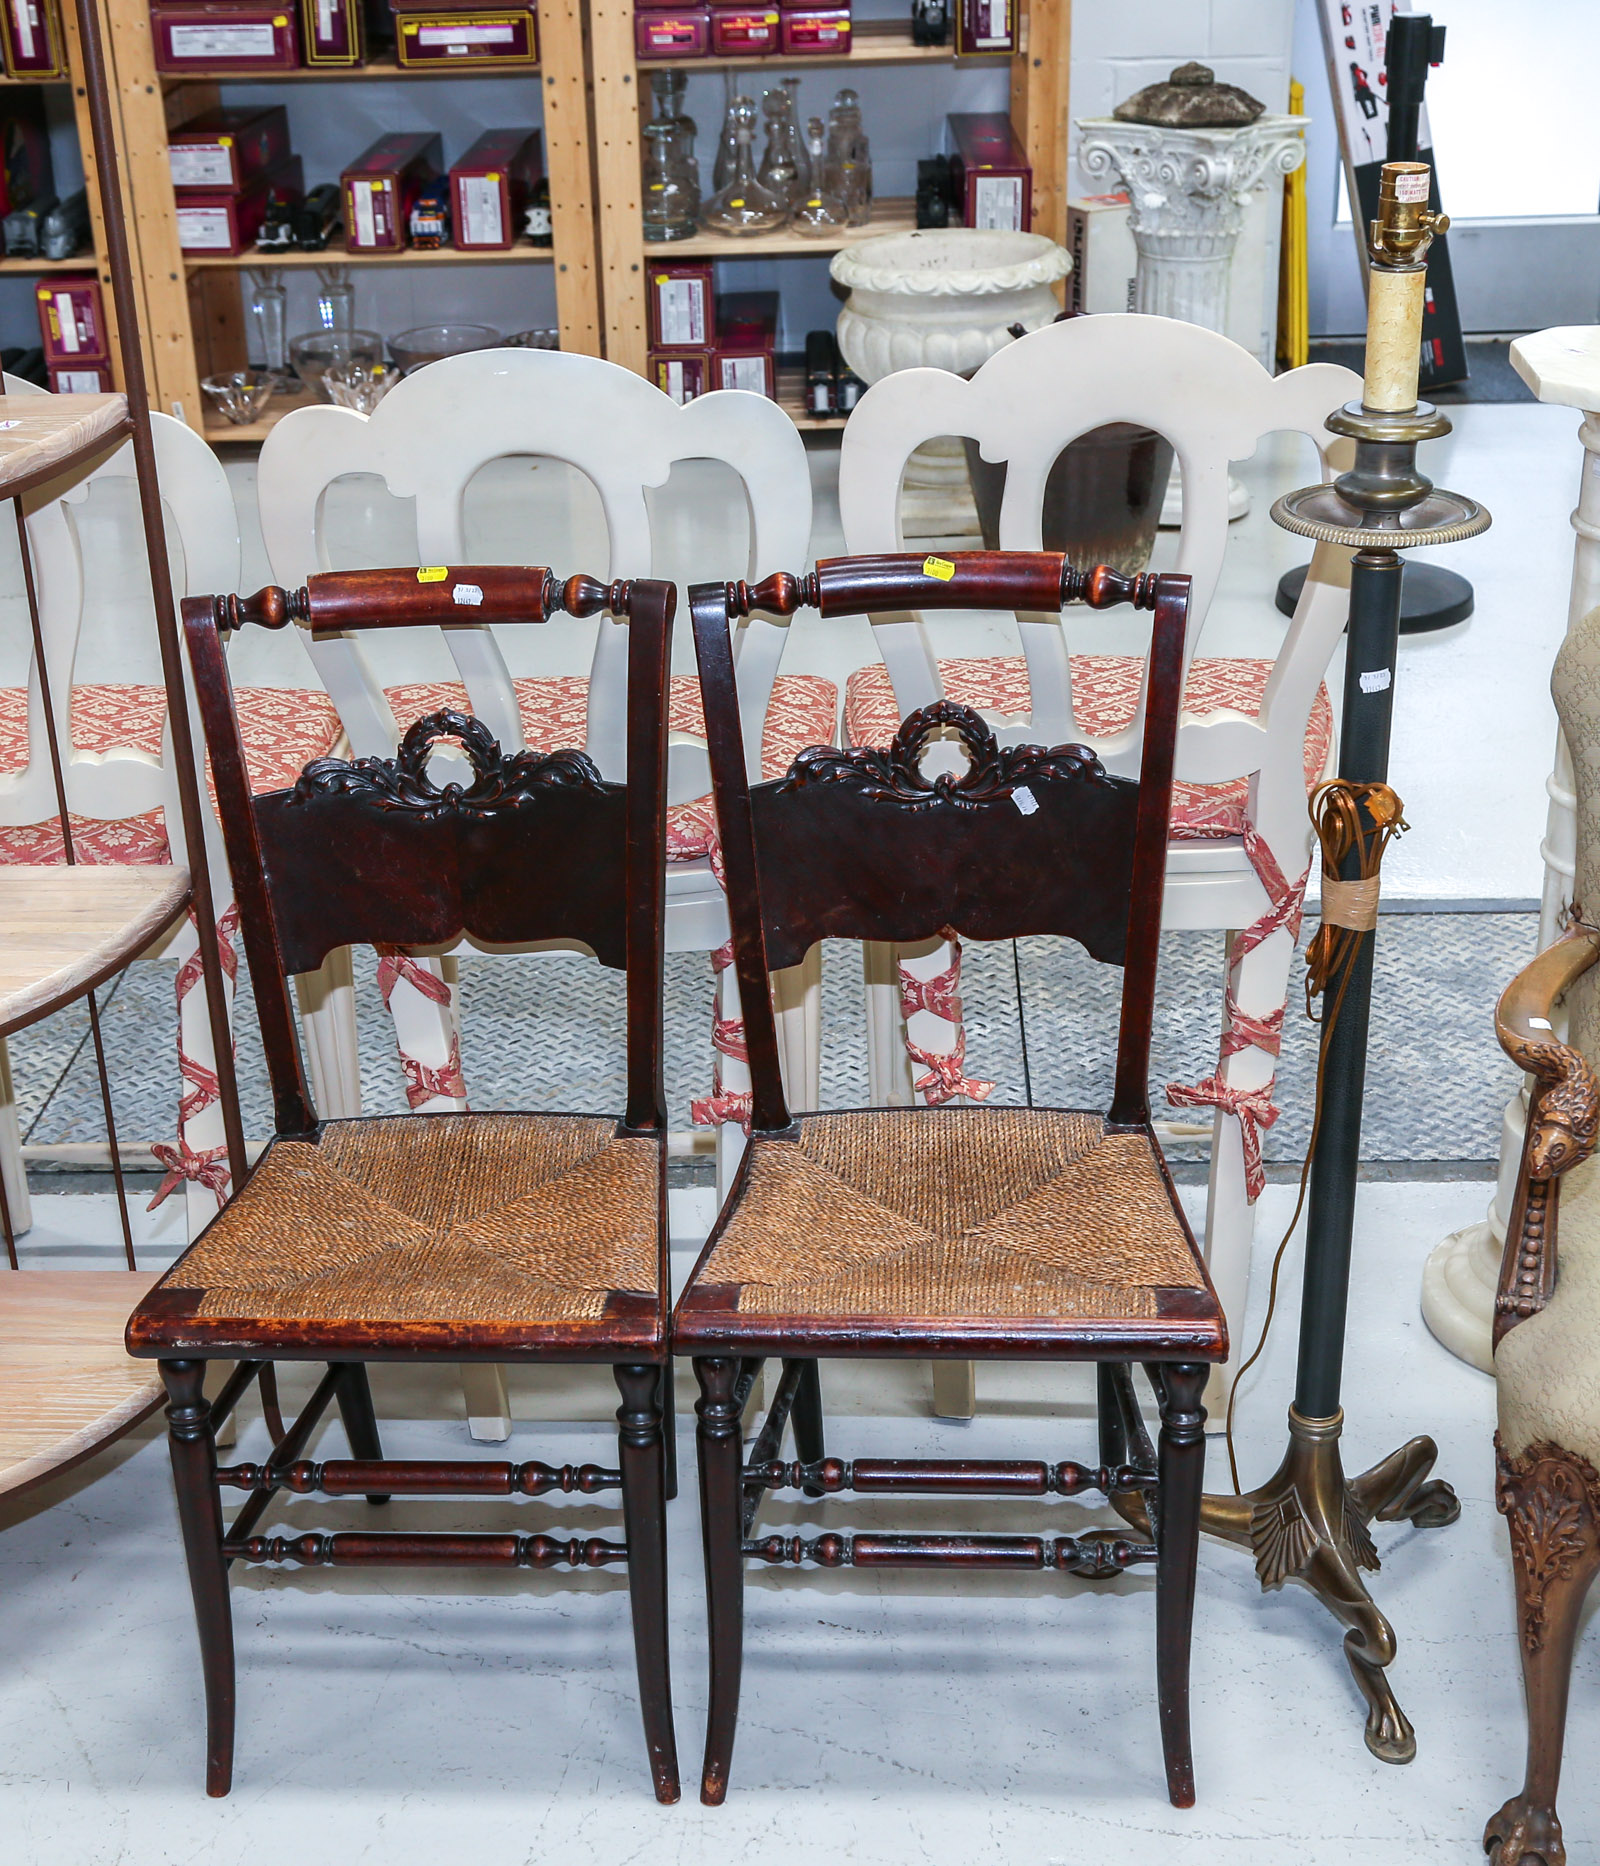 A PAIR OF COLONIAL REVIVAL CHAIRS;